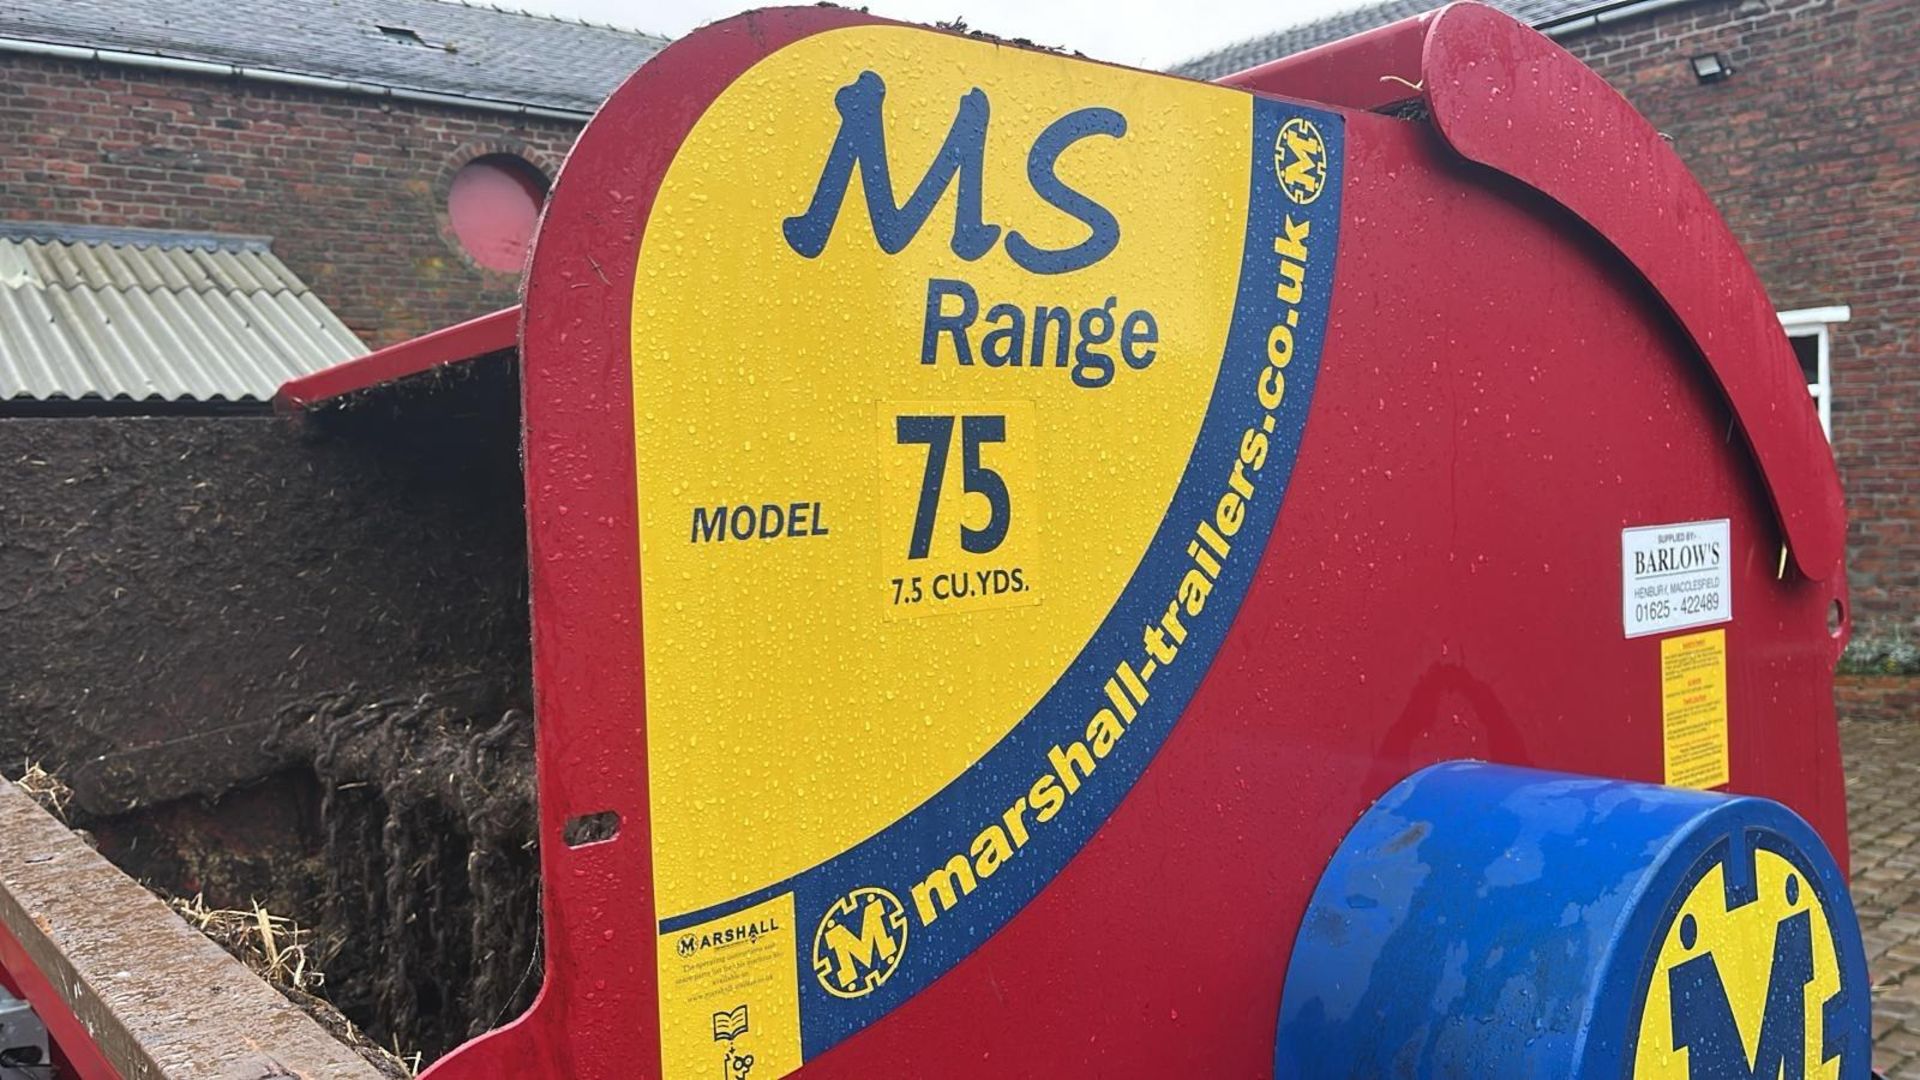 2016 MARSHALL MS 75 ROTARY MANURE SPREADER 7.5 CUBIC YARDS CARRYING CAPACITY 5 TONNE SERIAL NUMBER - Image 12 of 13